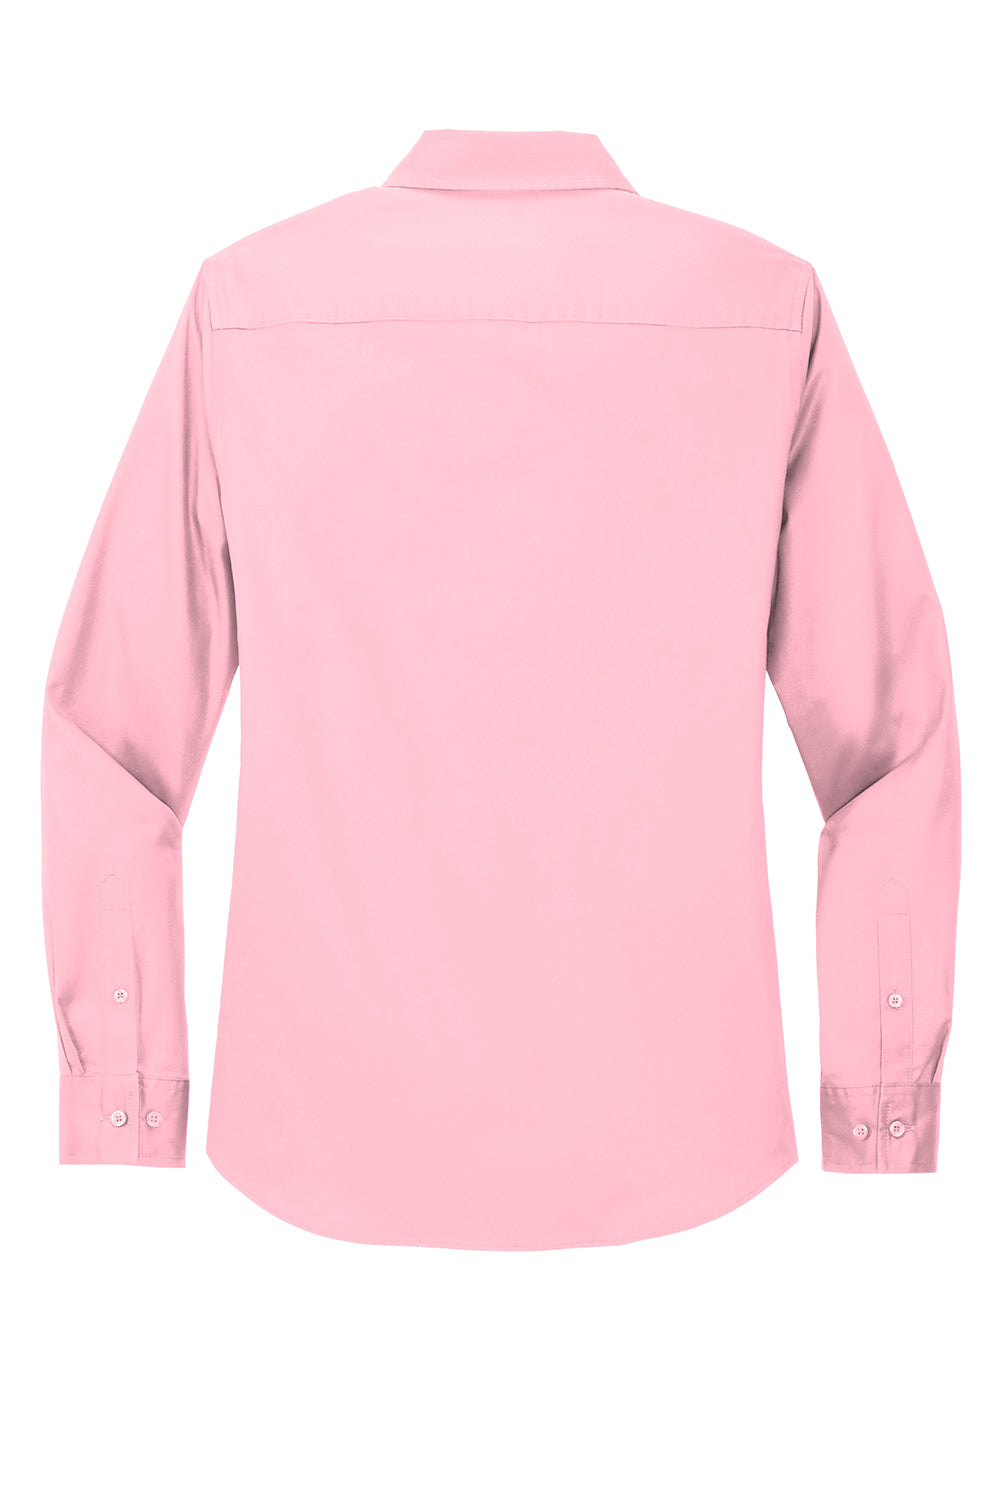 Port Authority L608 Womens Easy Care Wrinkle Resistant Long Sleeve Button Down Shirt Light Pink Flat Back